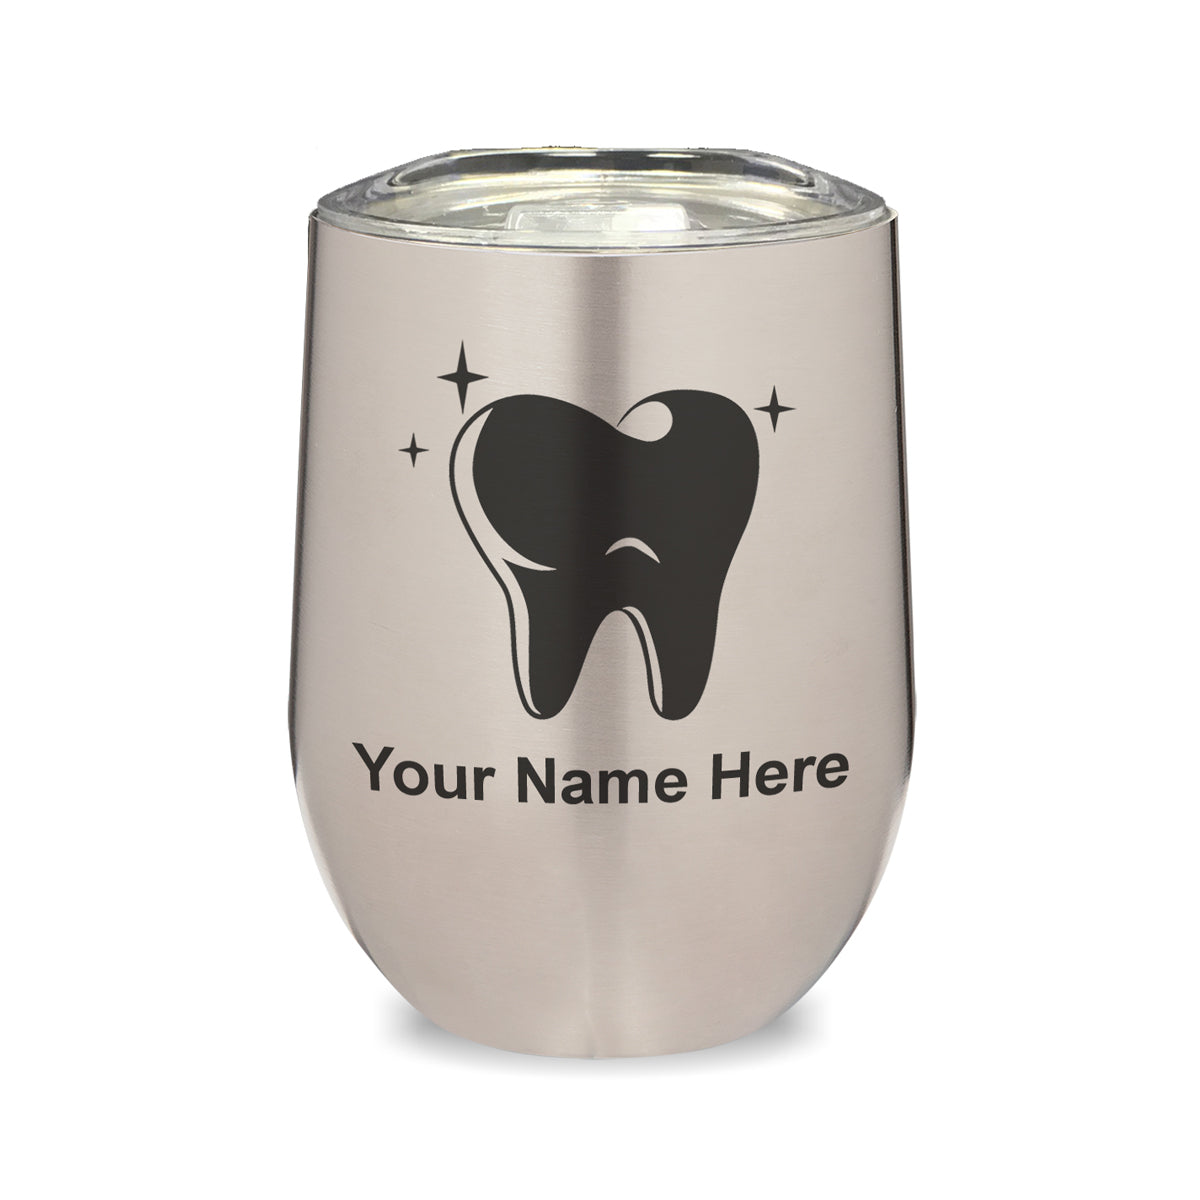 LaserGram Double Wall Stainless Steel Wine Glass, Tooth, Personalized Engraving Included